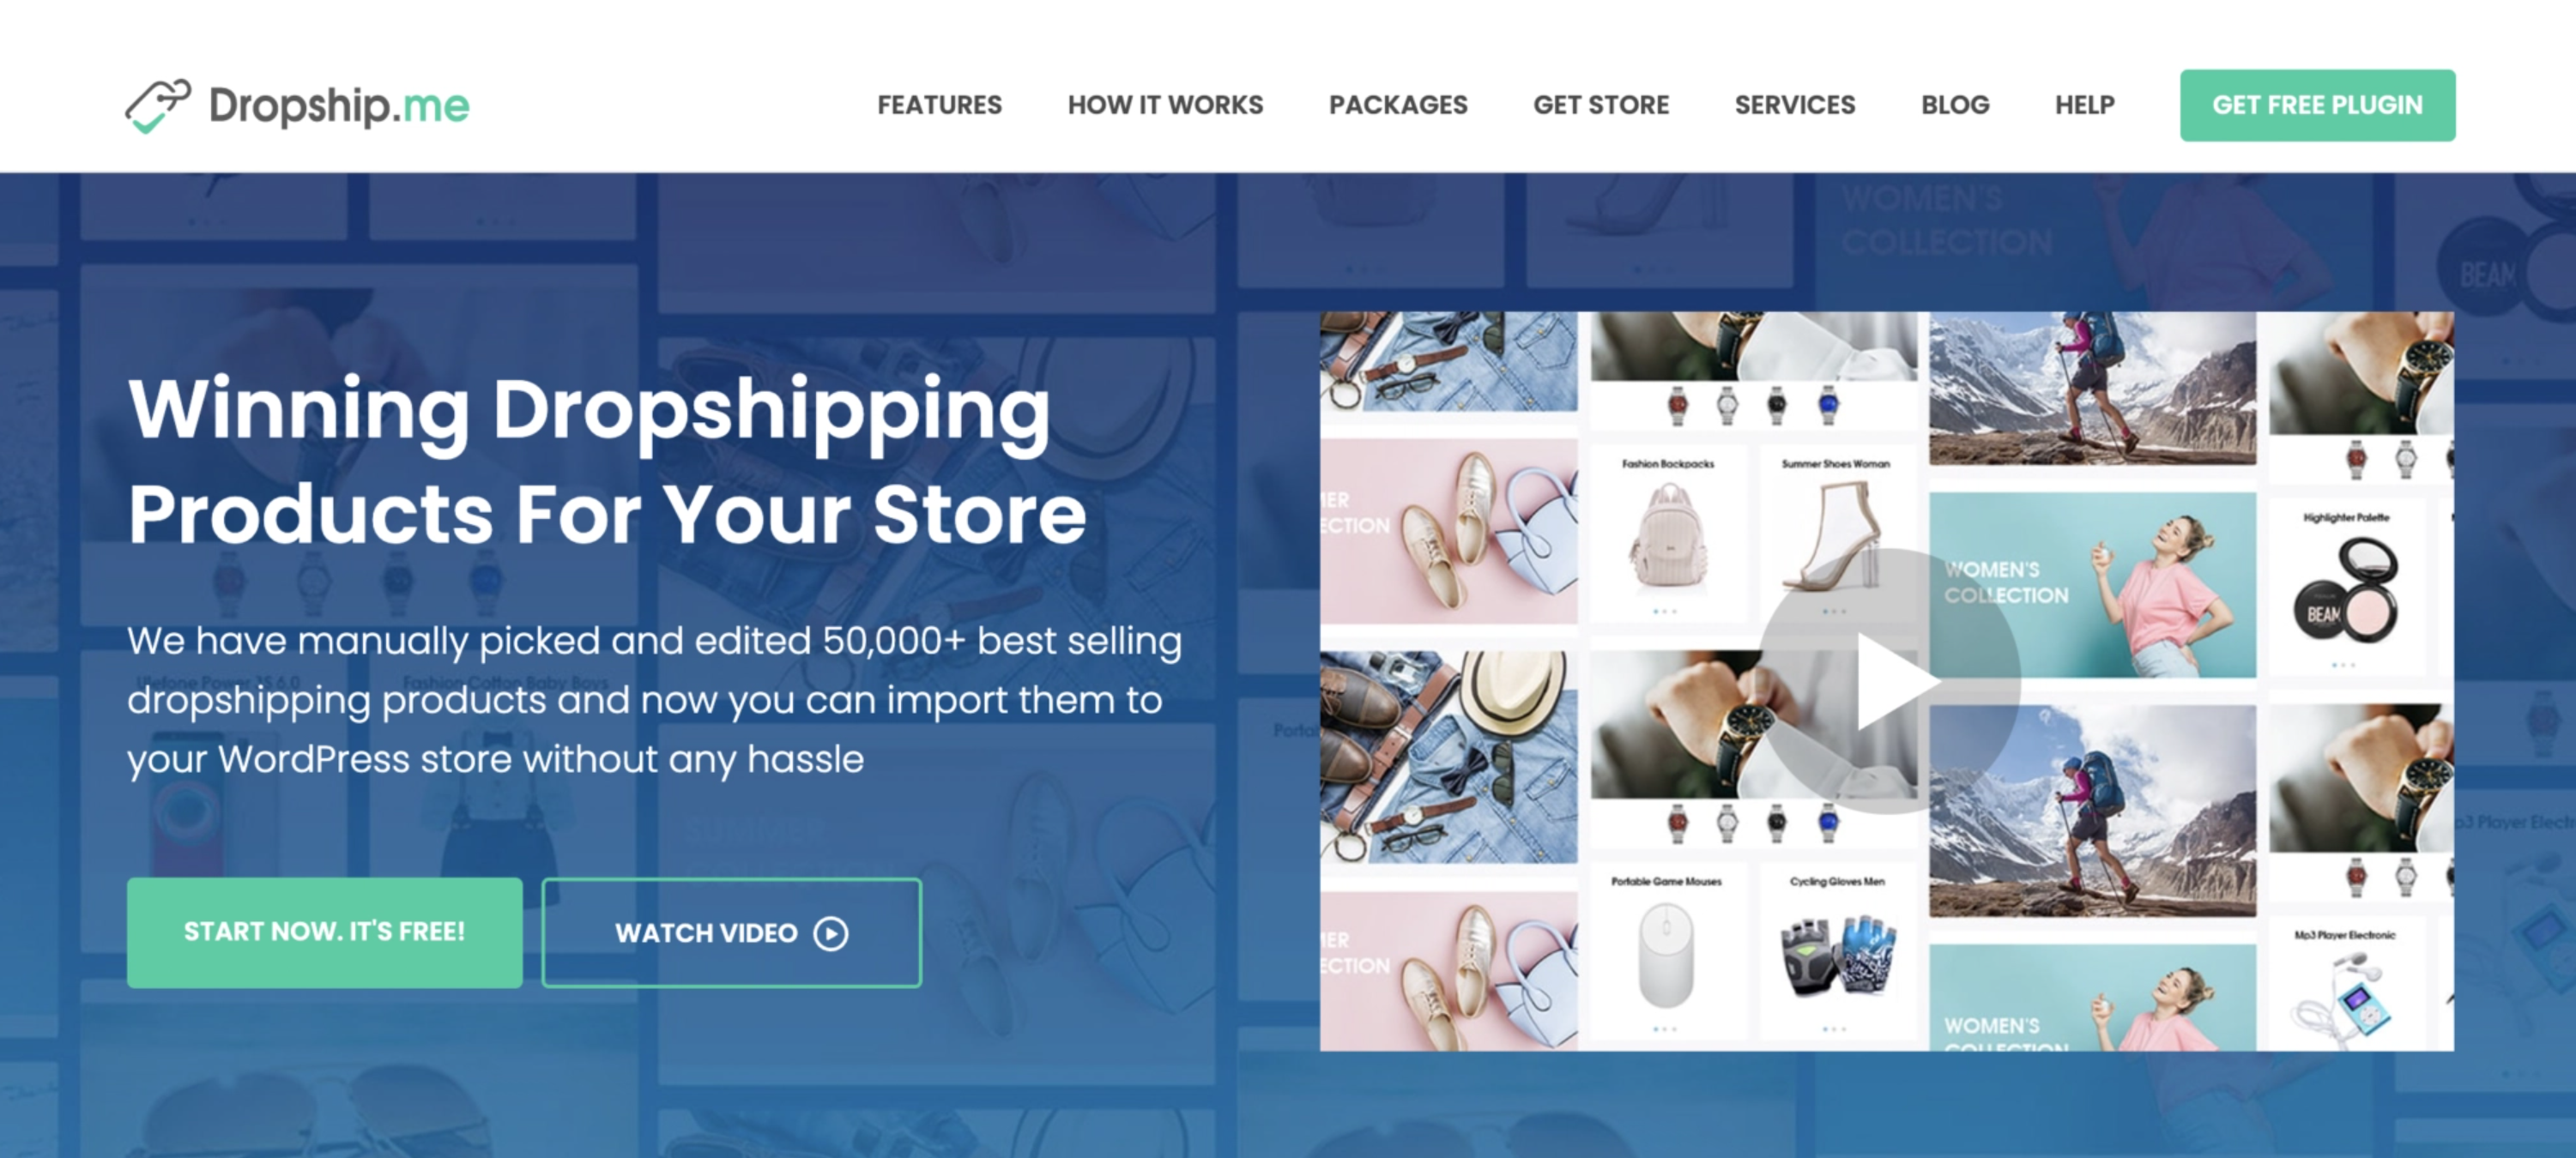 DropShip Me a source for finding dropshipping products